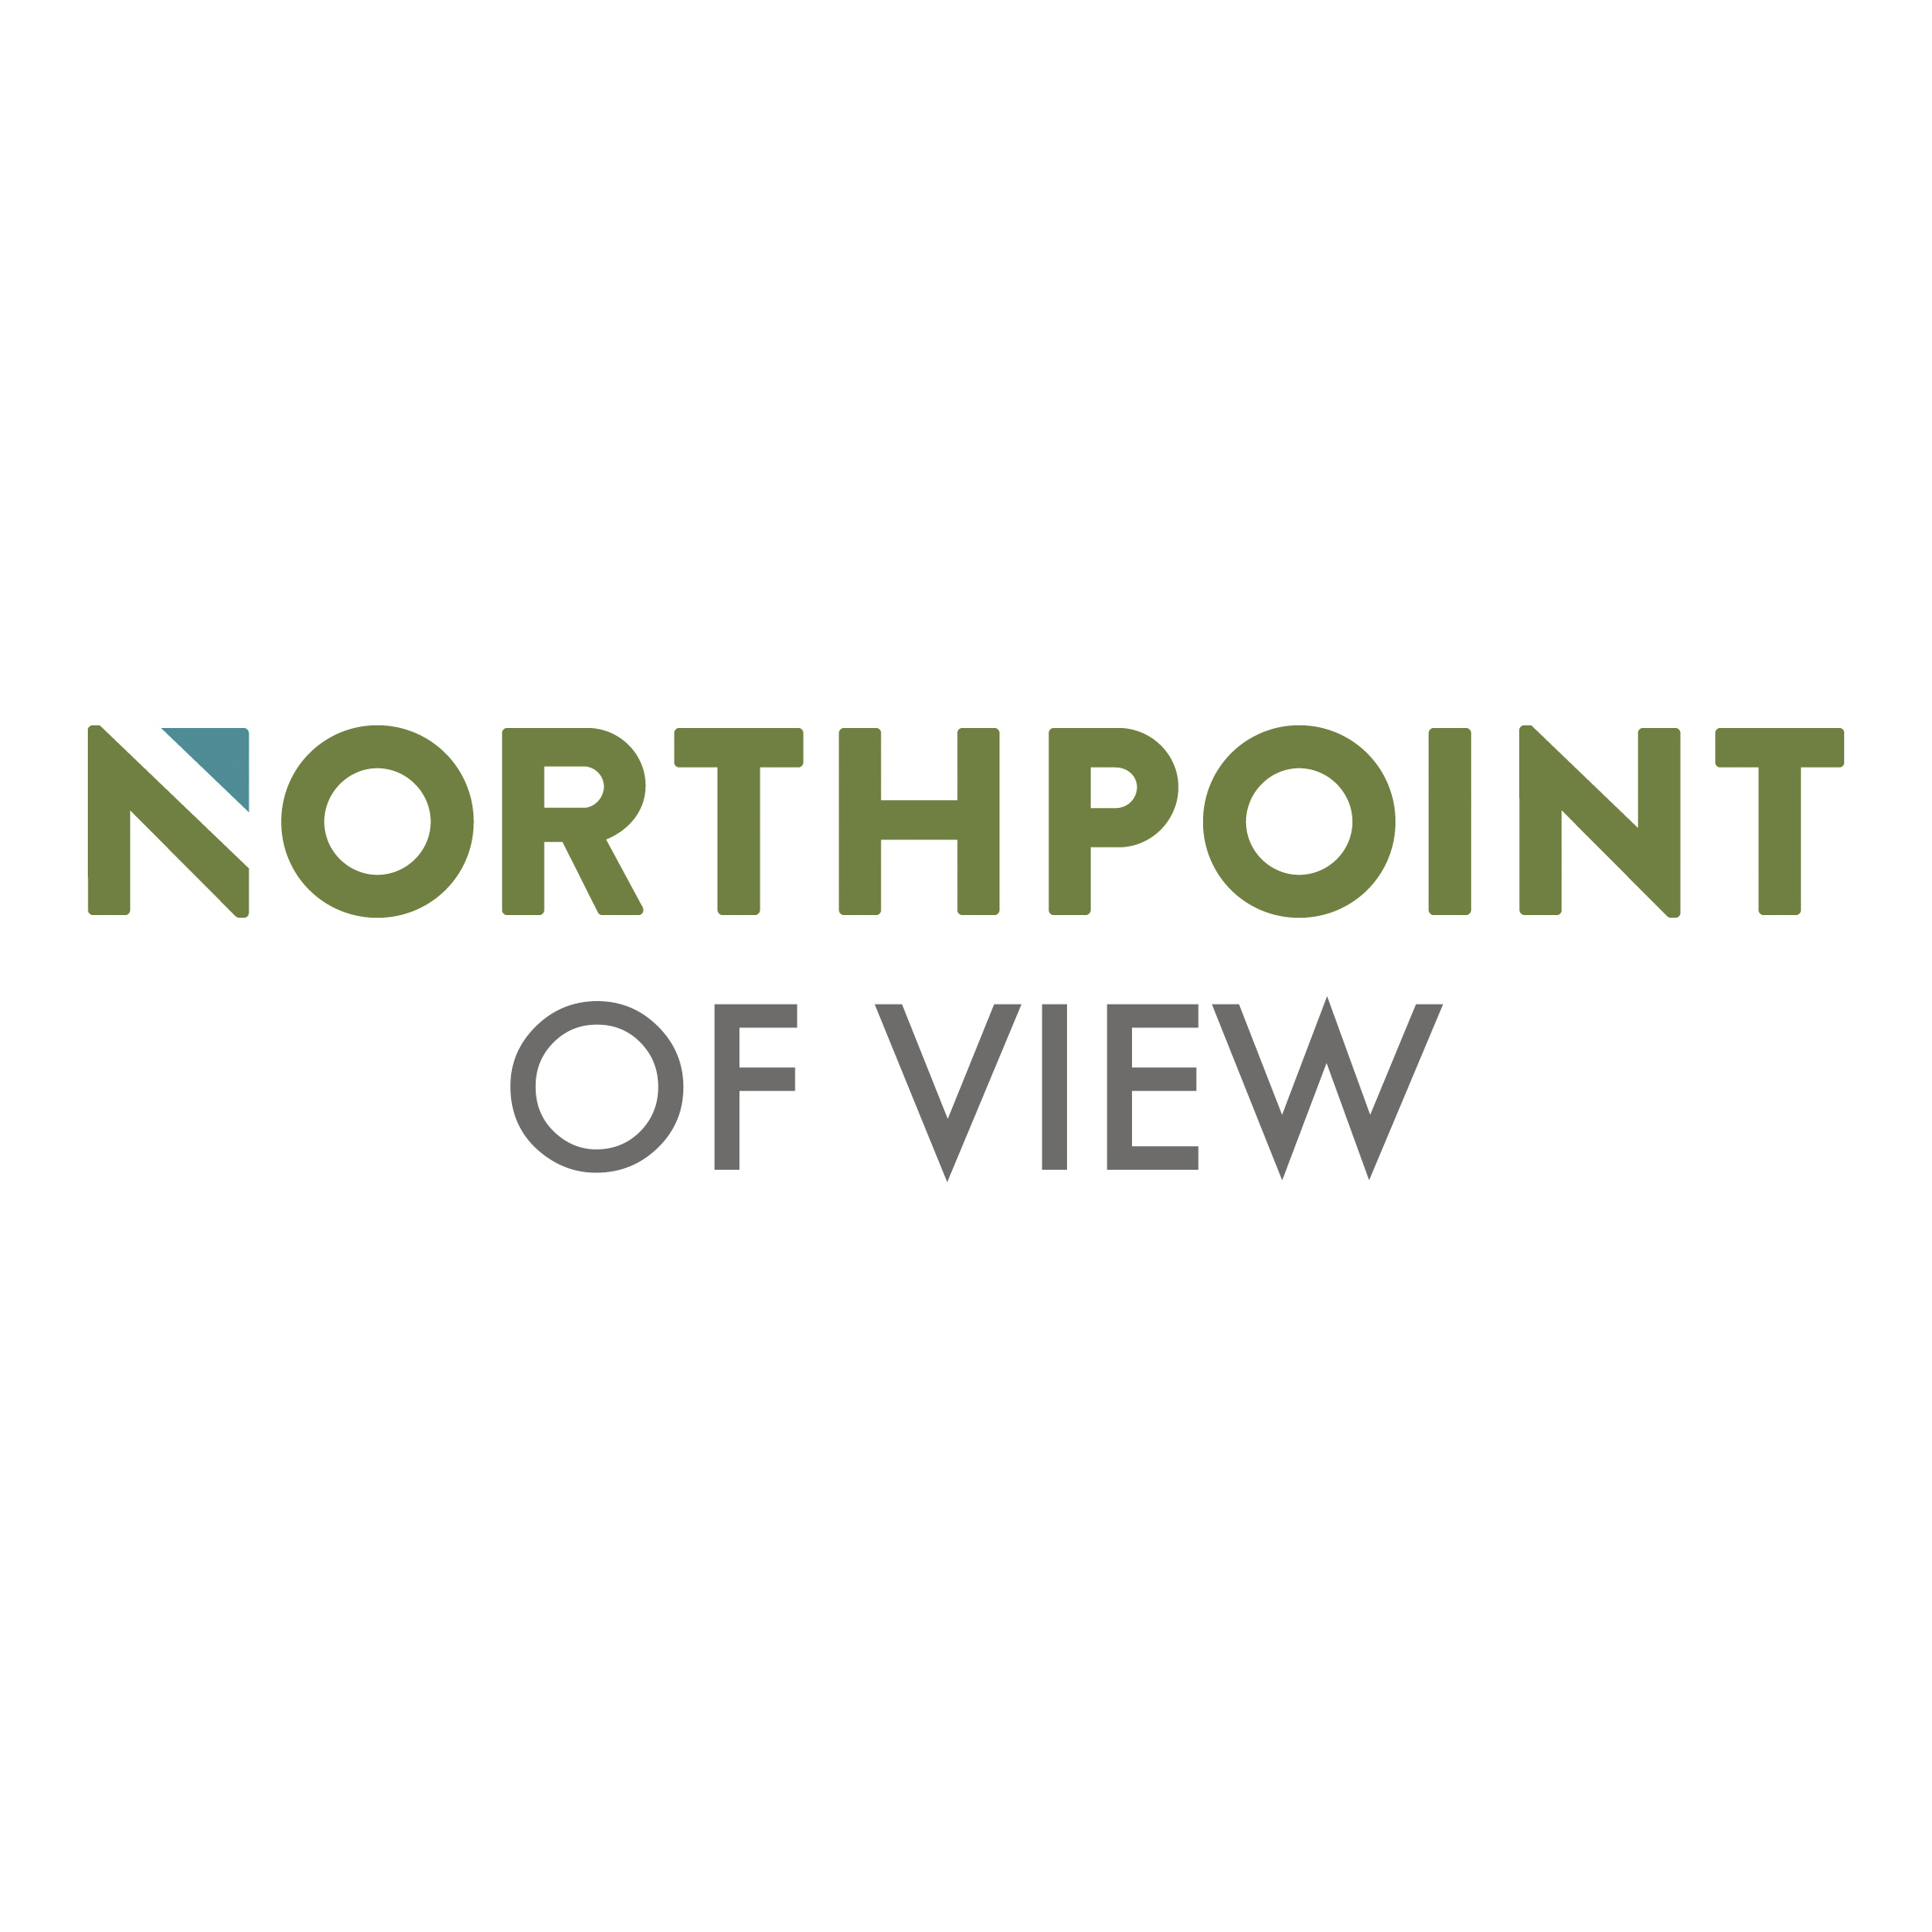 North Point of View: The Long and Winding Road